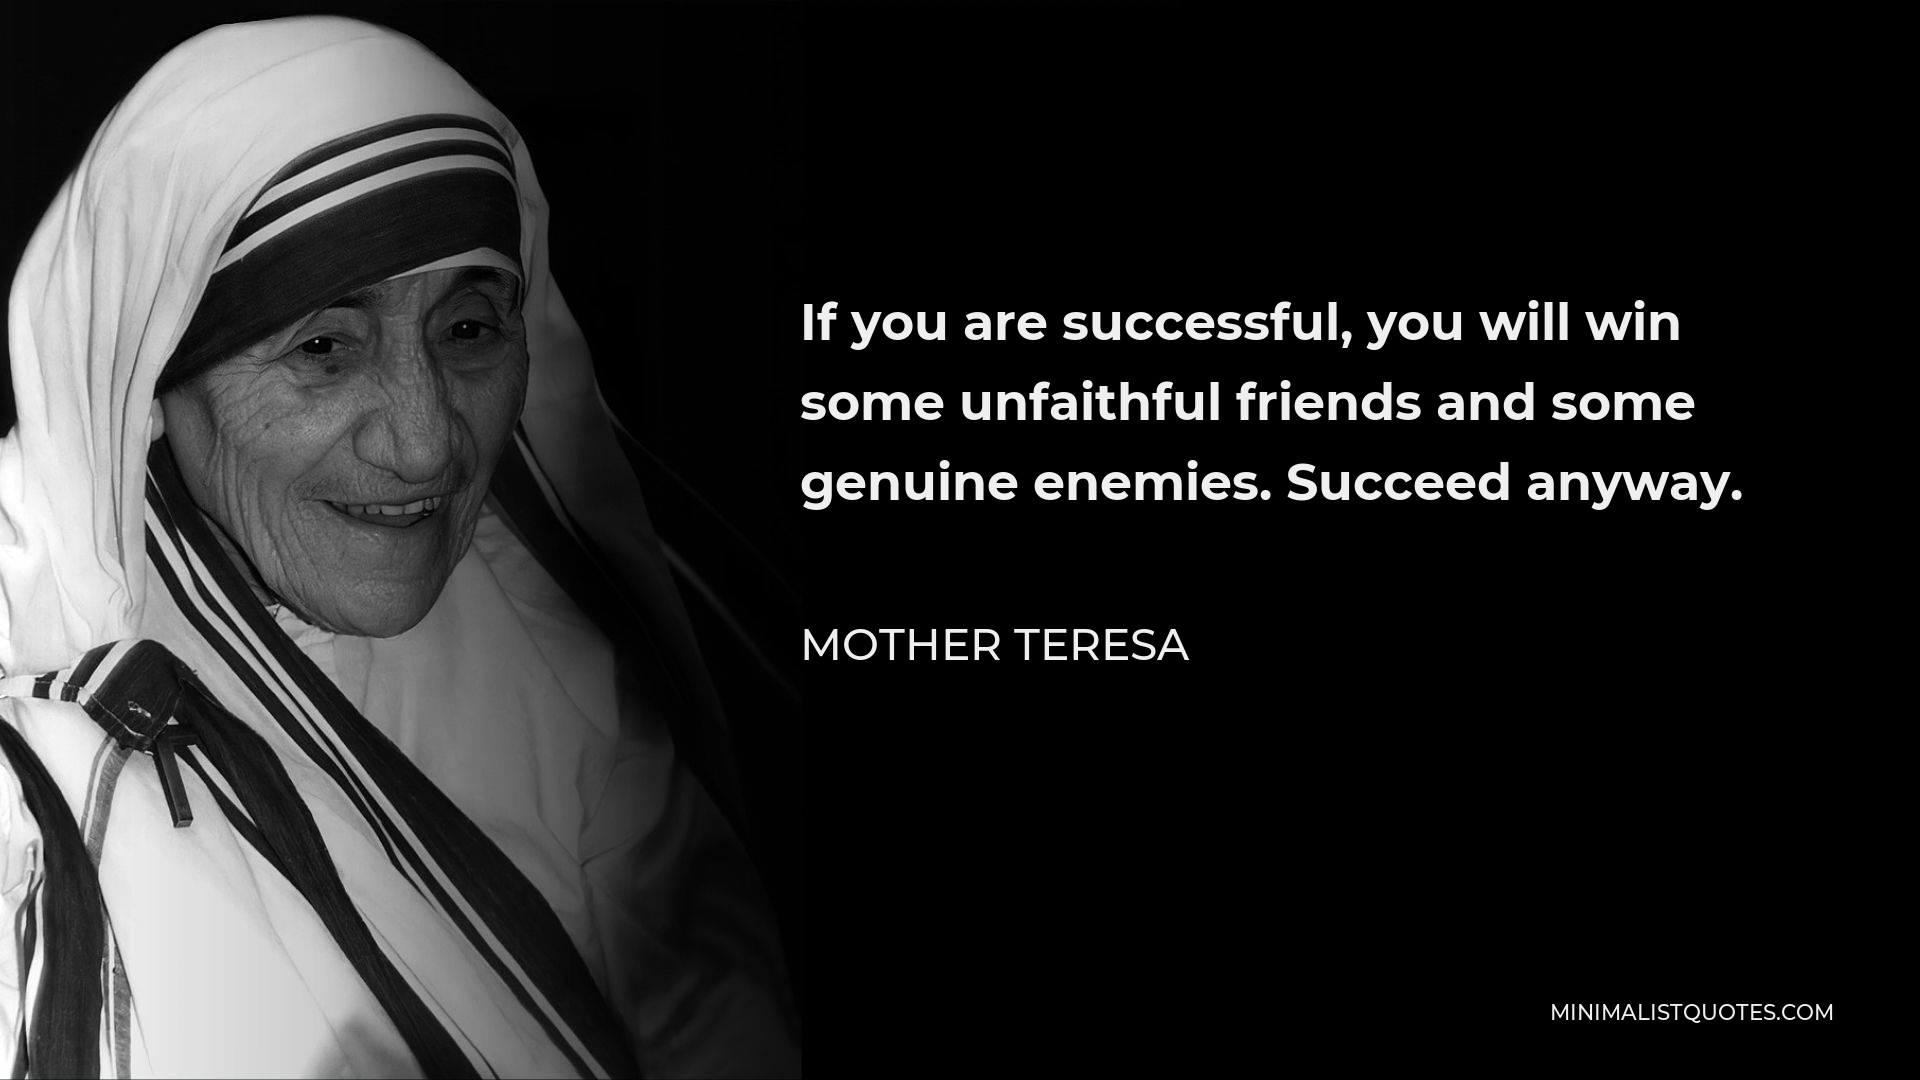 Mother Teresa Quote - If you are successful, you will win some unfaithful friends and some genuine enemies. Succeed anyway.